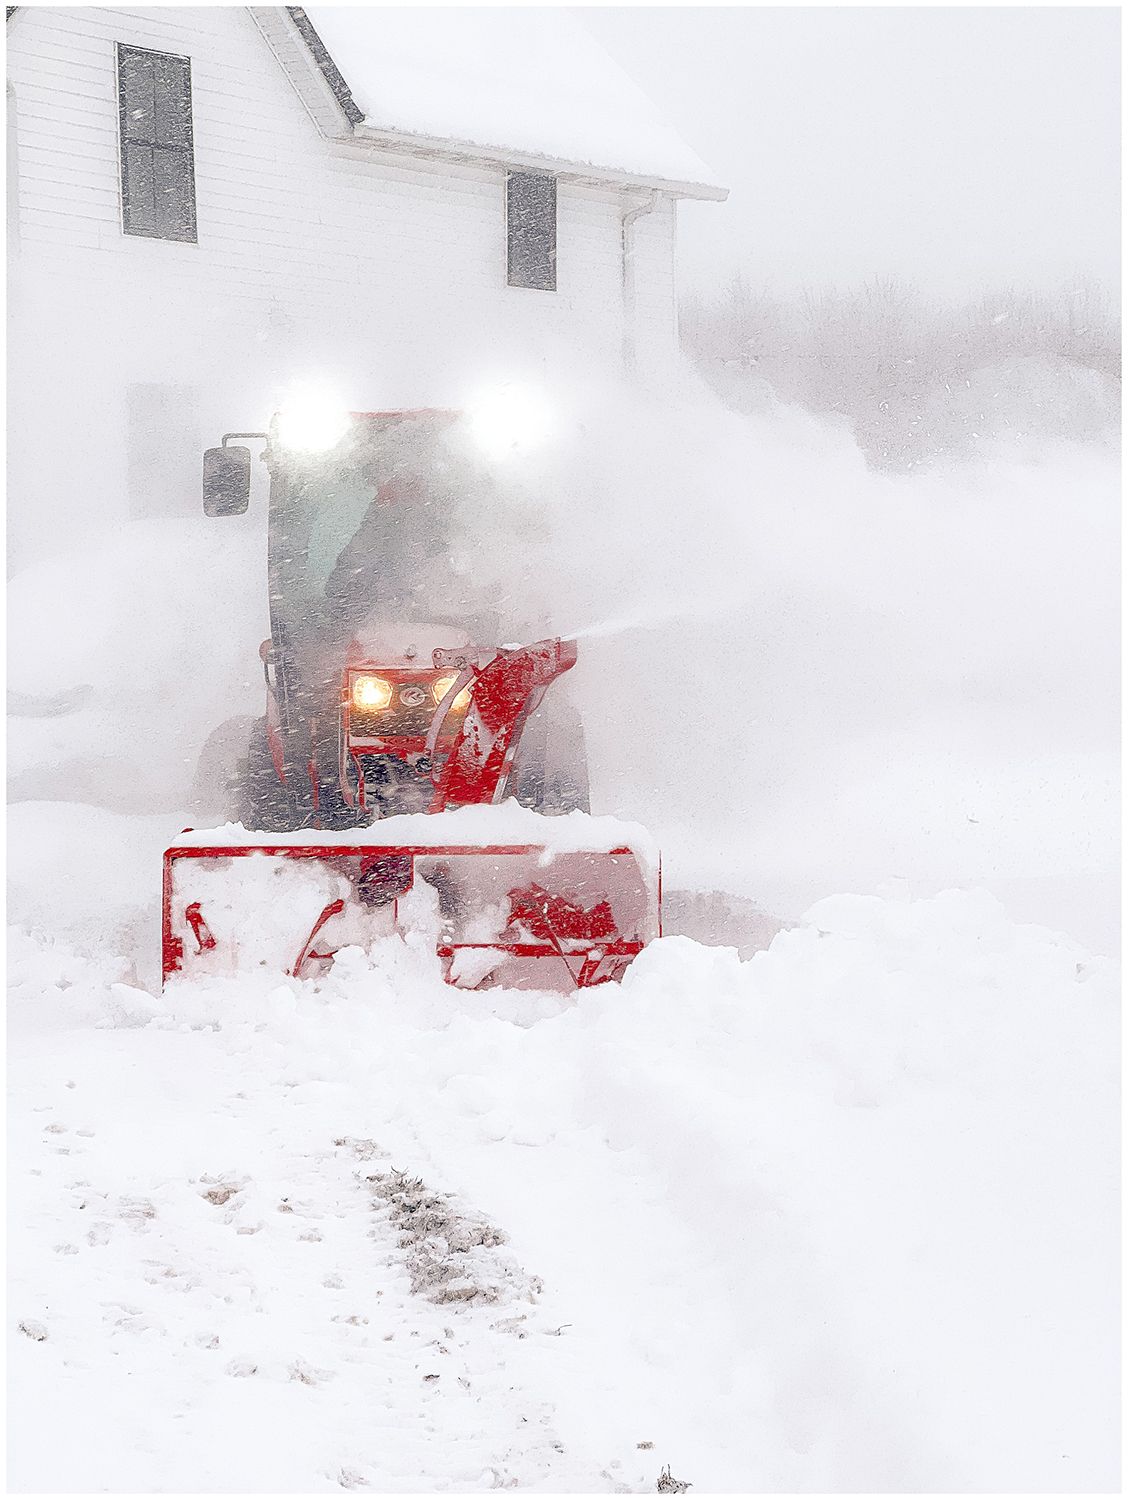 Snow blowing tractor